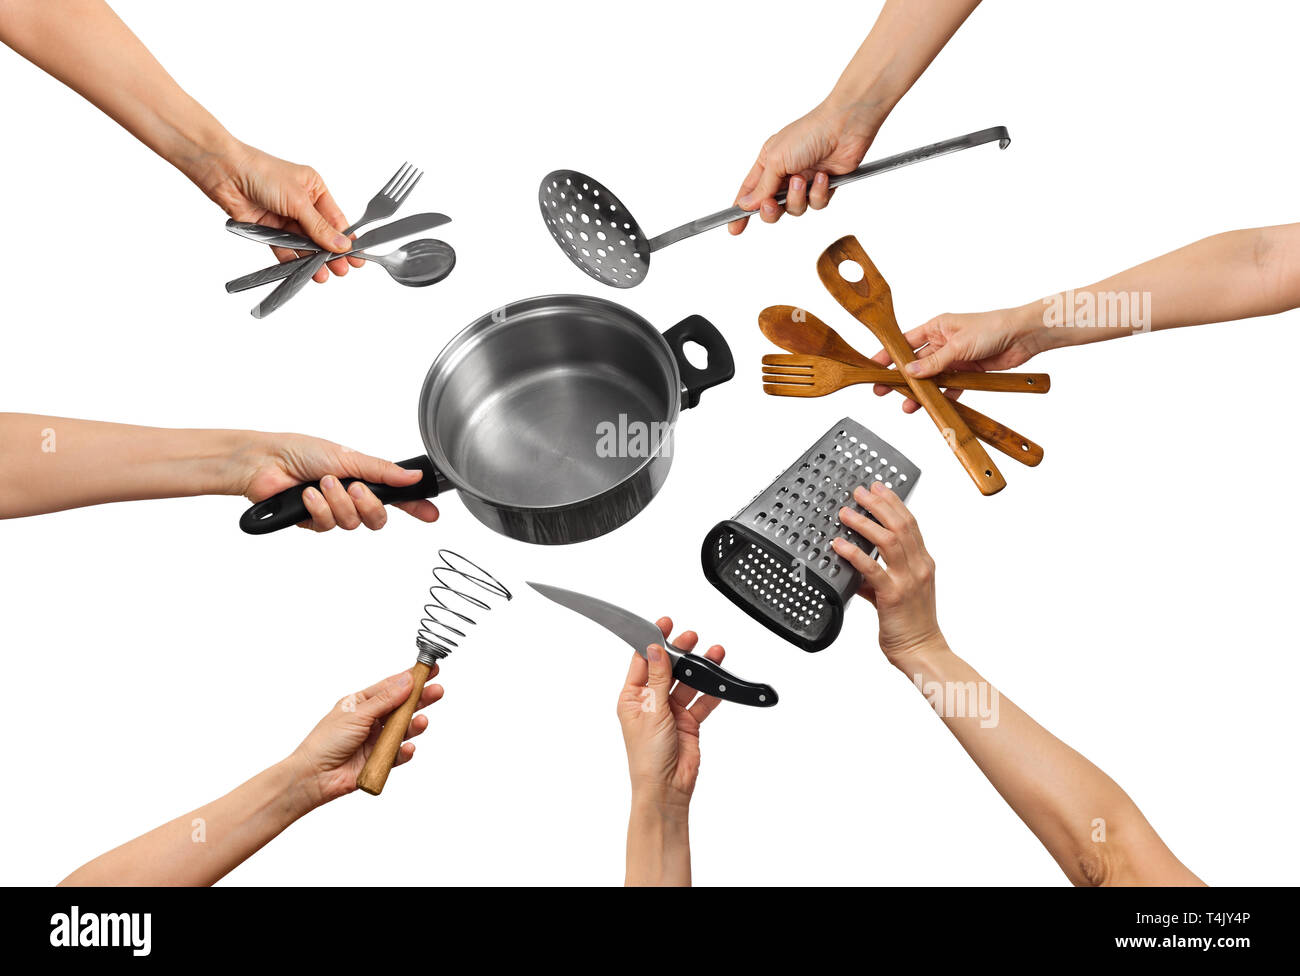 https://c8.alamy.com/comp/T4JY4P/set-of-the-kitchen-equipment-in-hands-on-white-background-T4JY4P.jpg